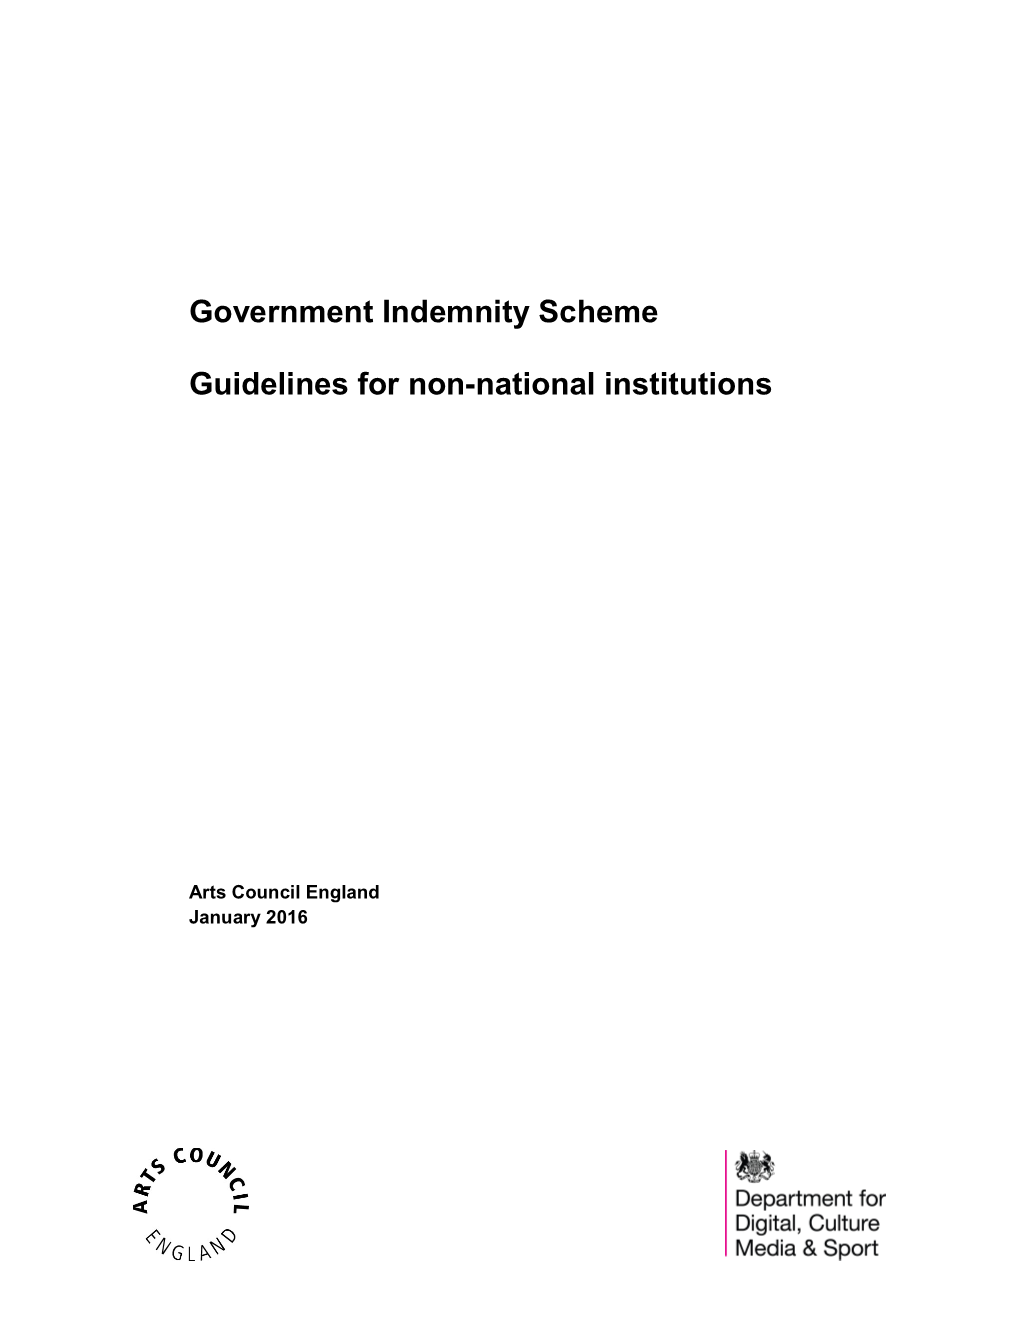 Government Indemnity Scheme Guidelines for Non-National Institutions